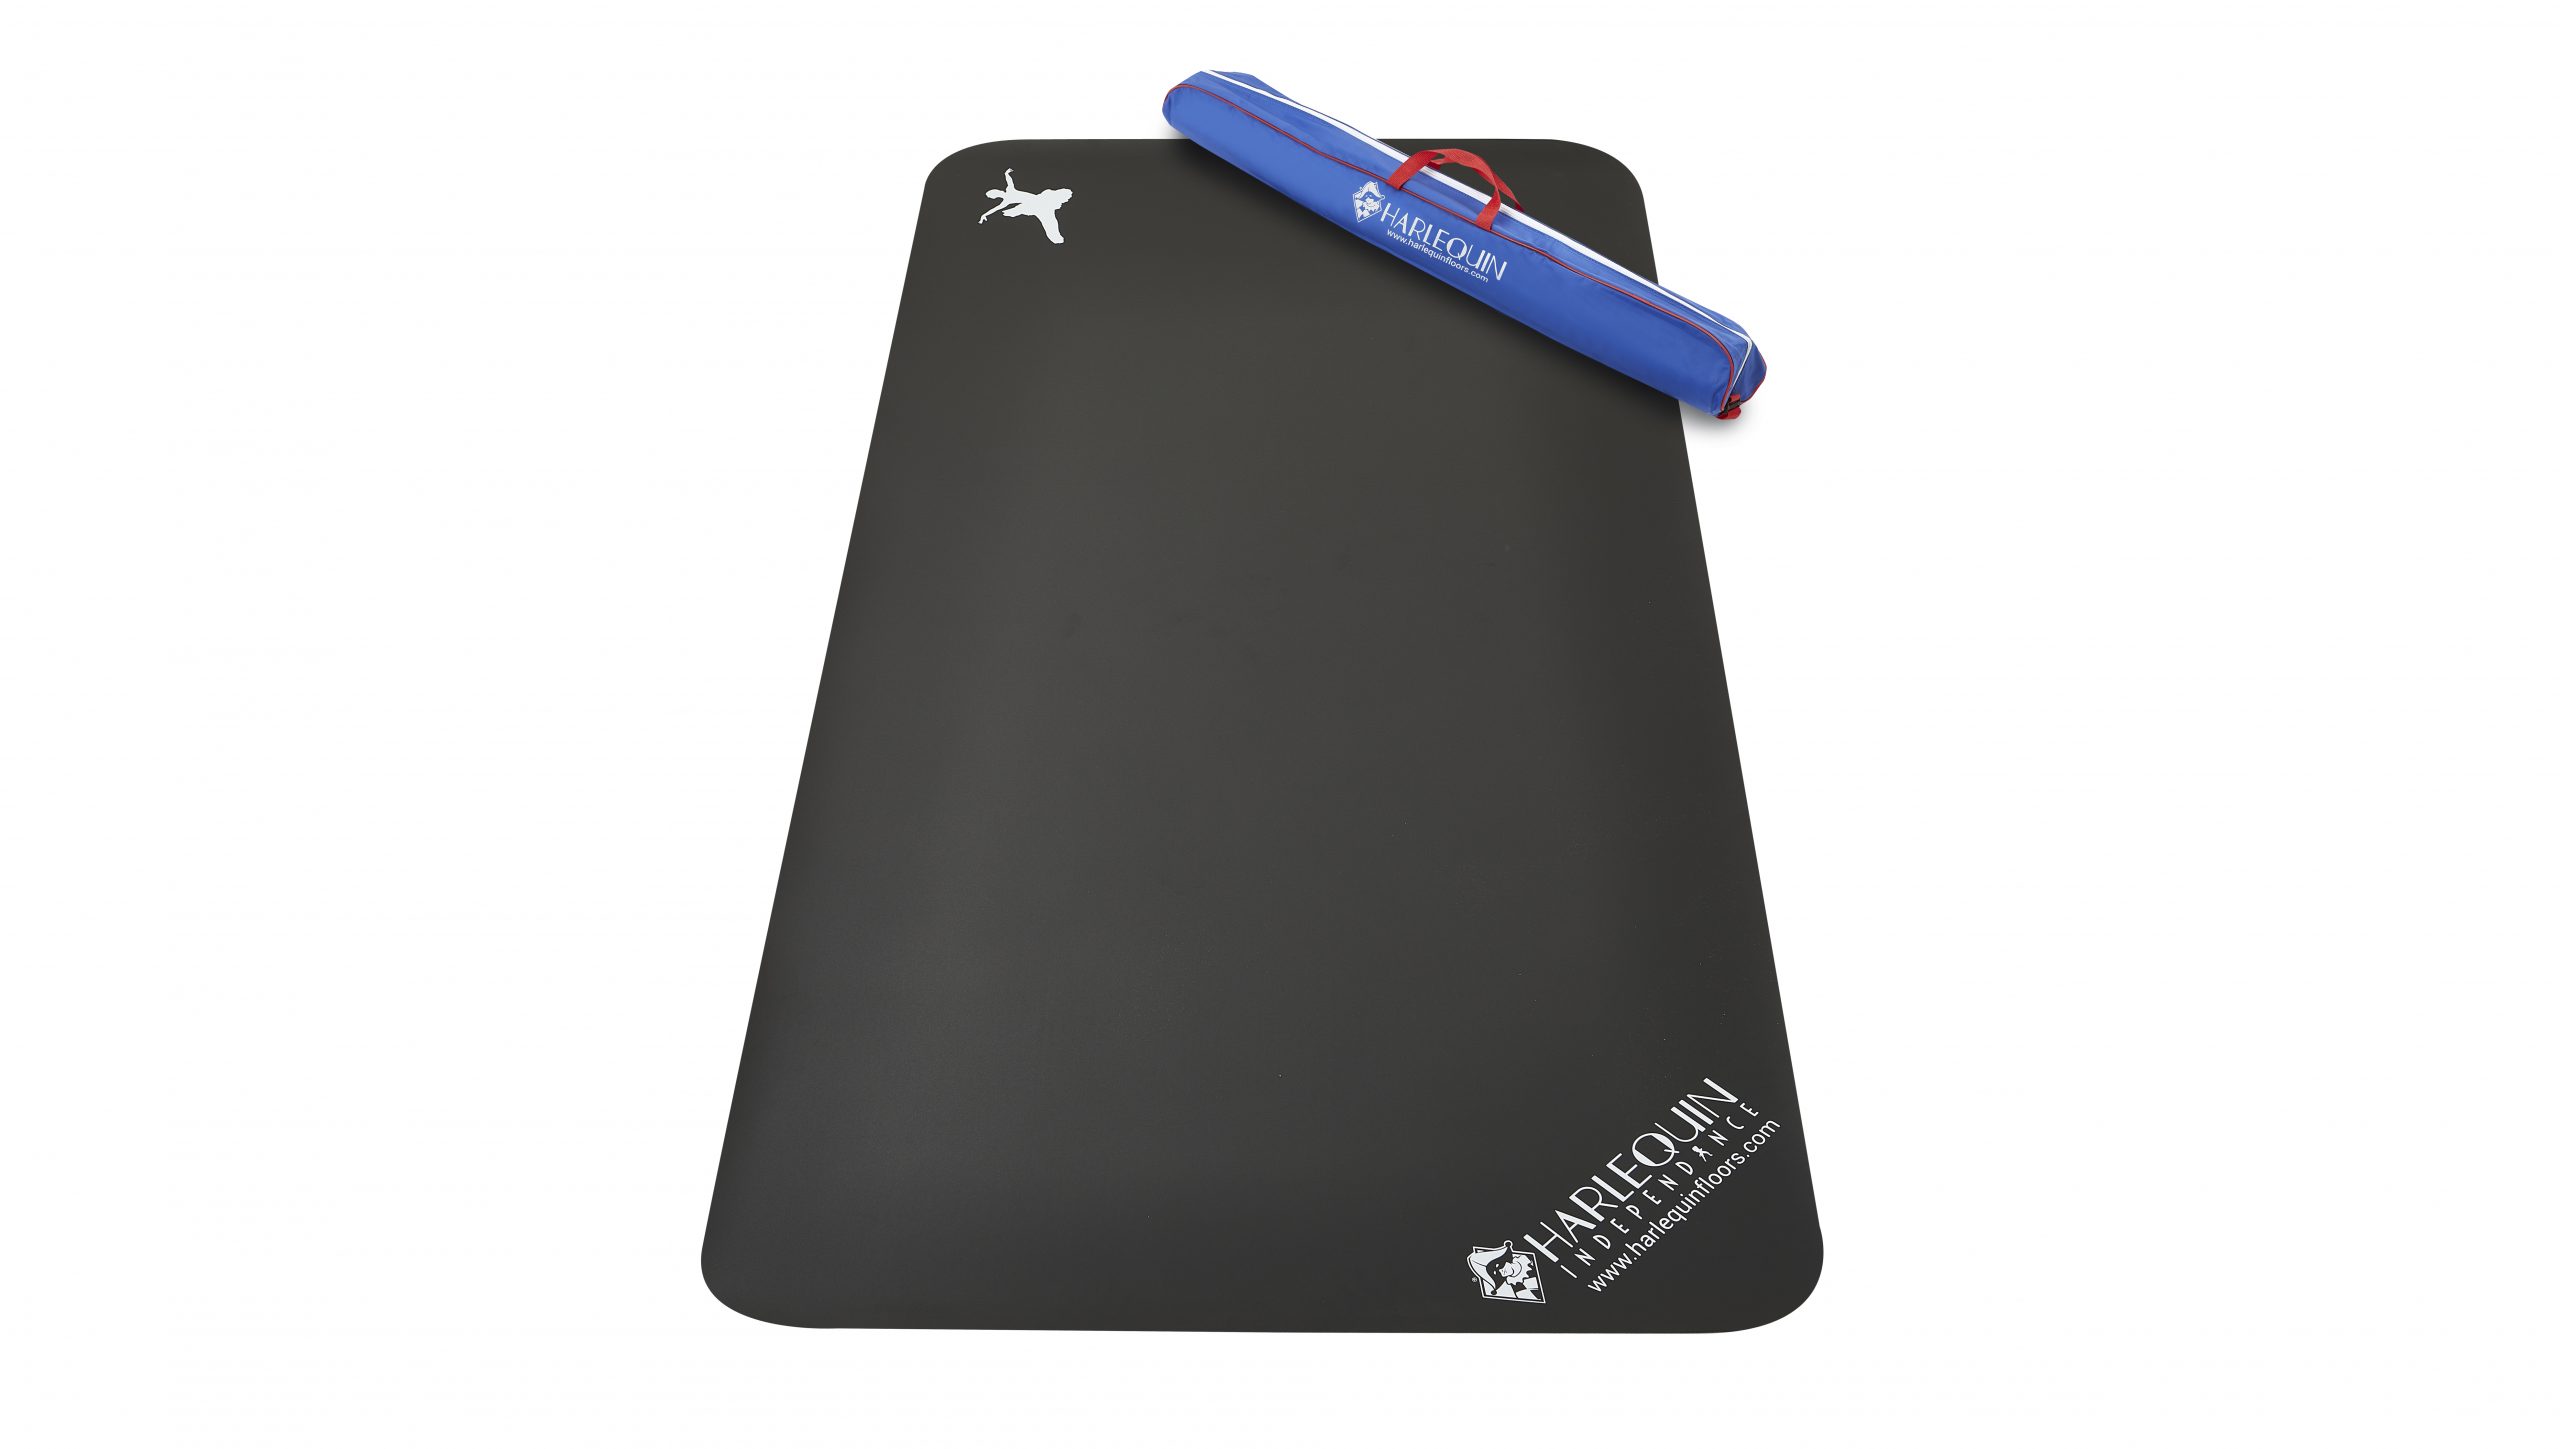 Harlequin Floors Americas - Introducing our Harlequin Dance Mat and Bag  Bundle! Our Dance Mat & Bag let you practice anywhere! Now available! 🩰  Includes: ✓ (1) 78″ x 39″ Harlequin Cascade™